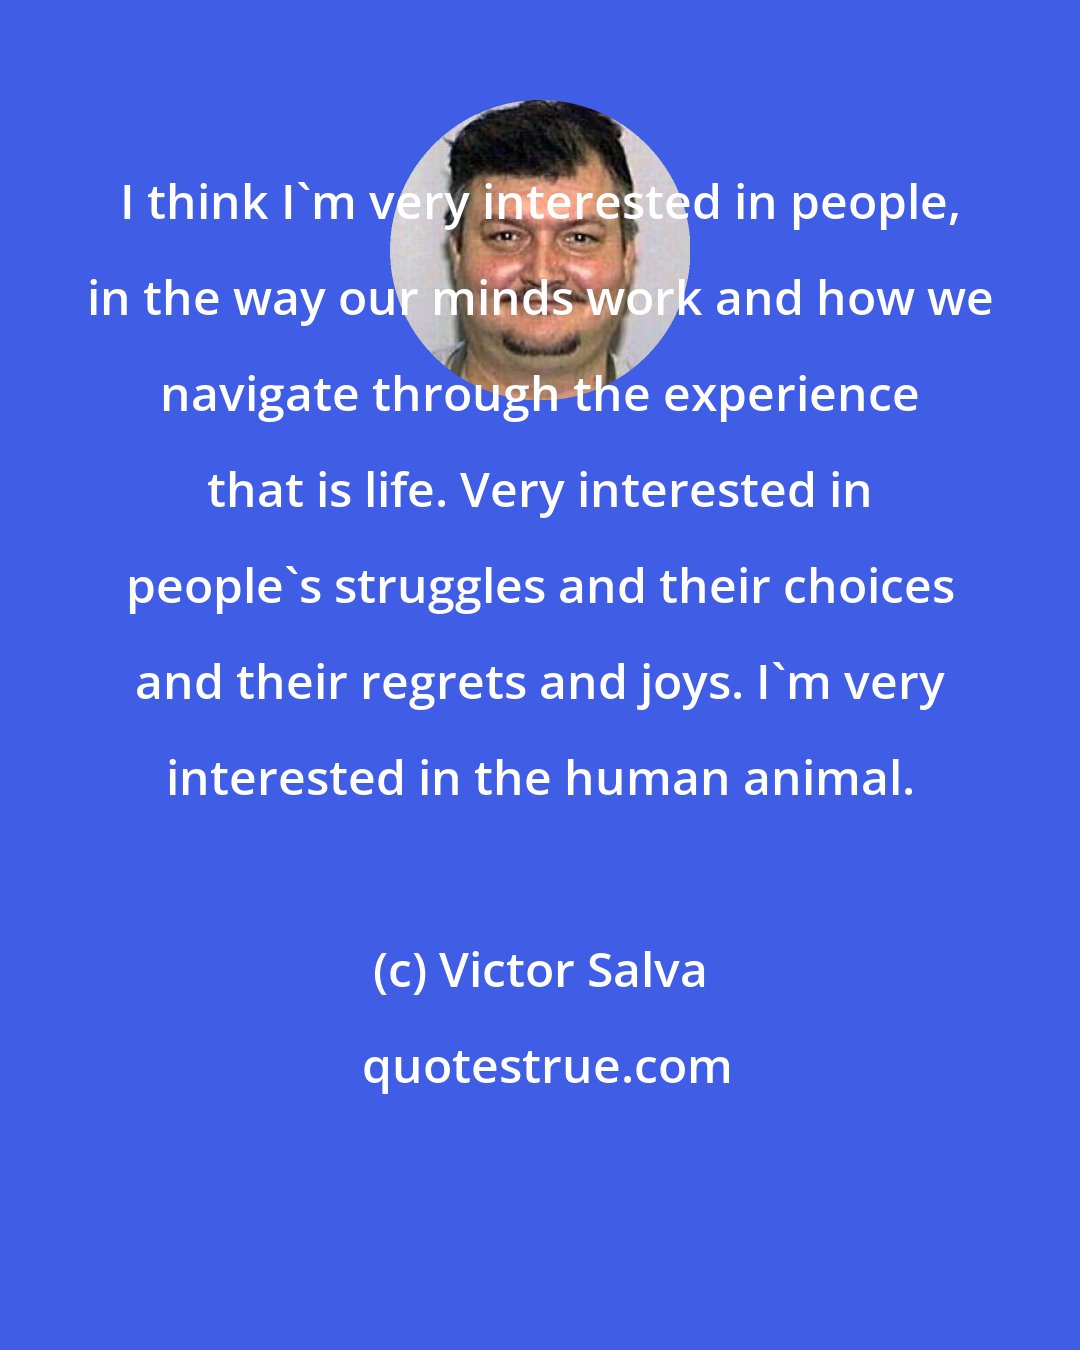 Victor Salva: I think I'm very interested in people, in the way our minds work and how we navigate through the experience that is life. Very interested in people's struggles and their choices and their regrets and joys. I'm very interested in the human animal.